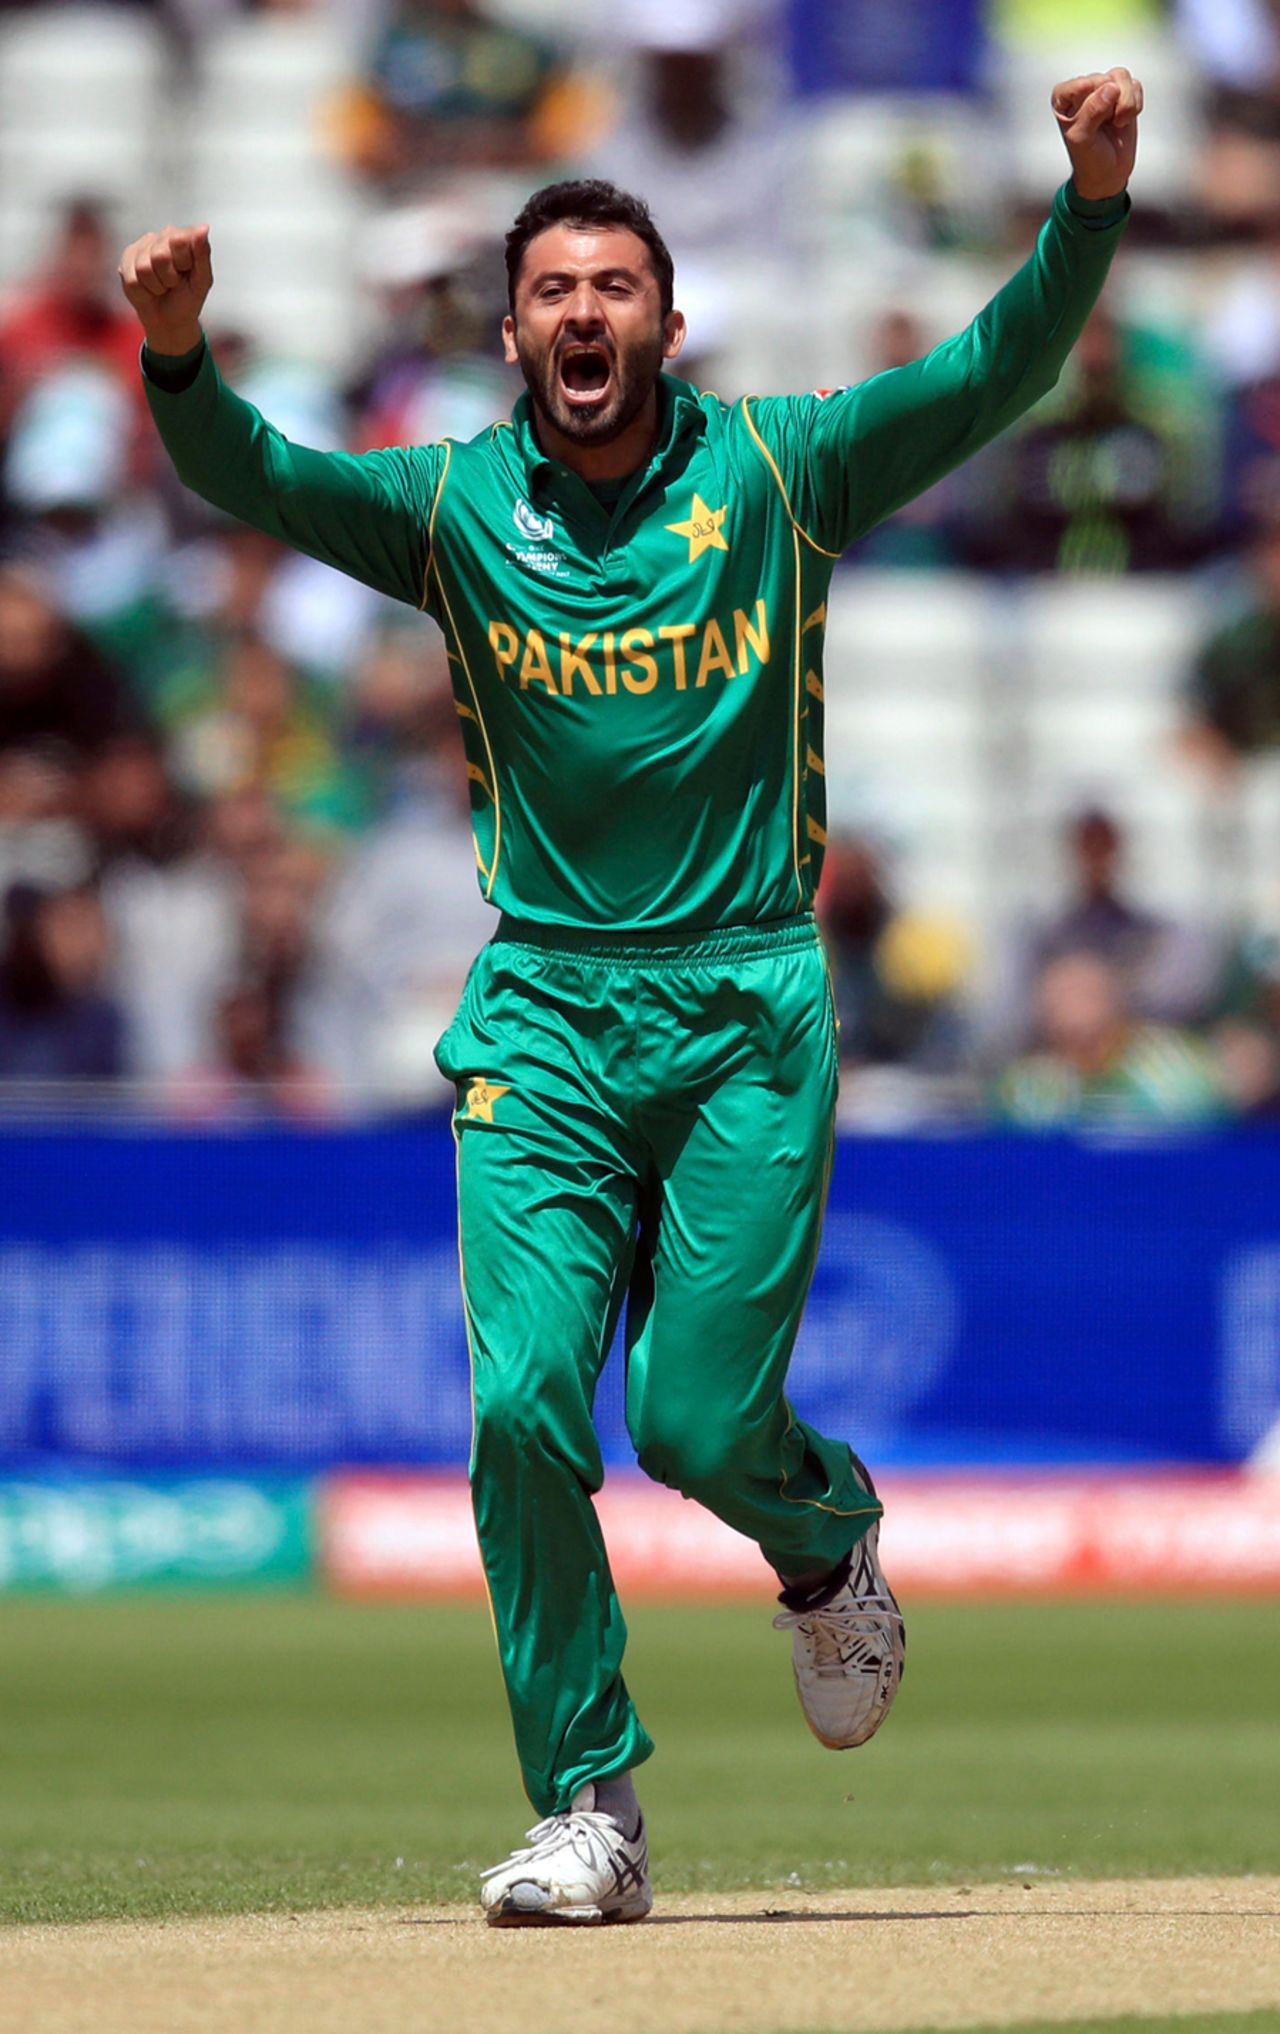 Junaid Khan replaced the injured Wahab Riaz in Pakistan's attack, Pakistan v South Africa, Champions Trophy, Group B, Edgbaston, June 7, 2017